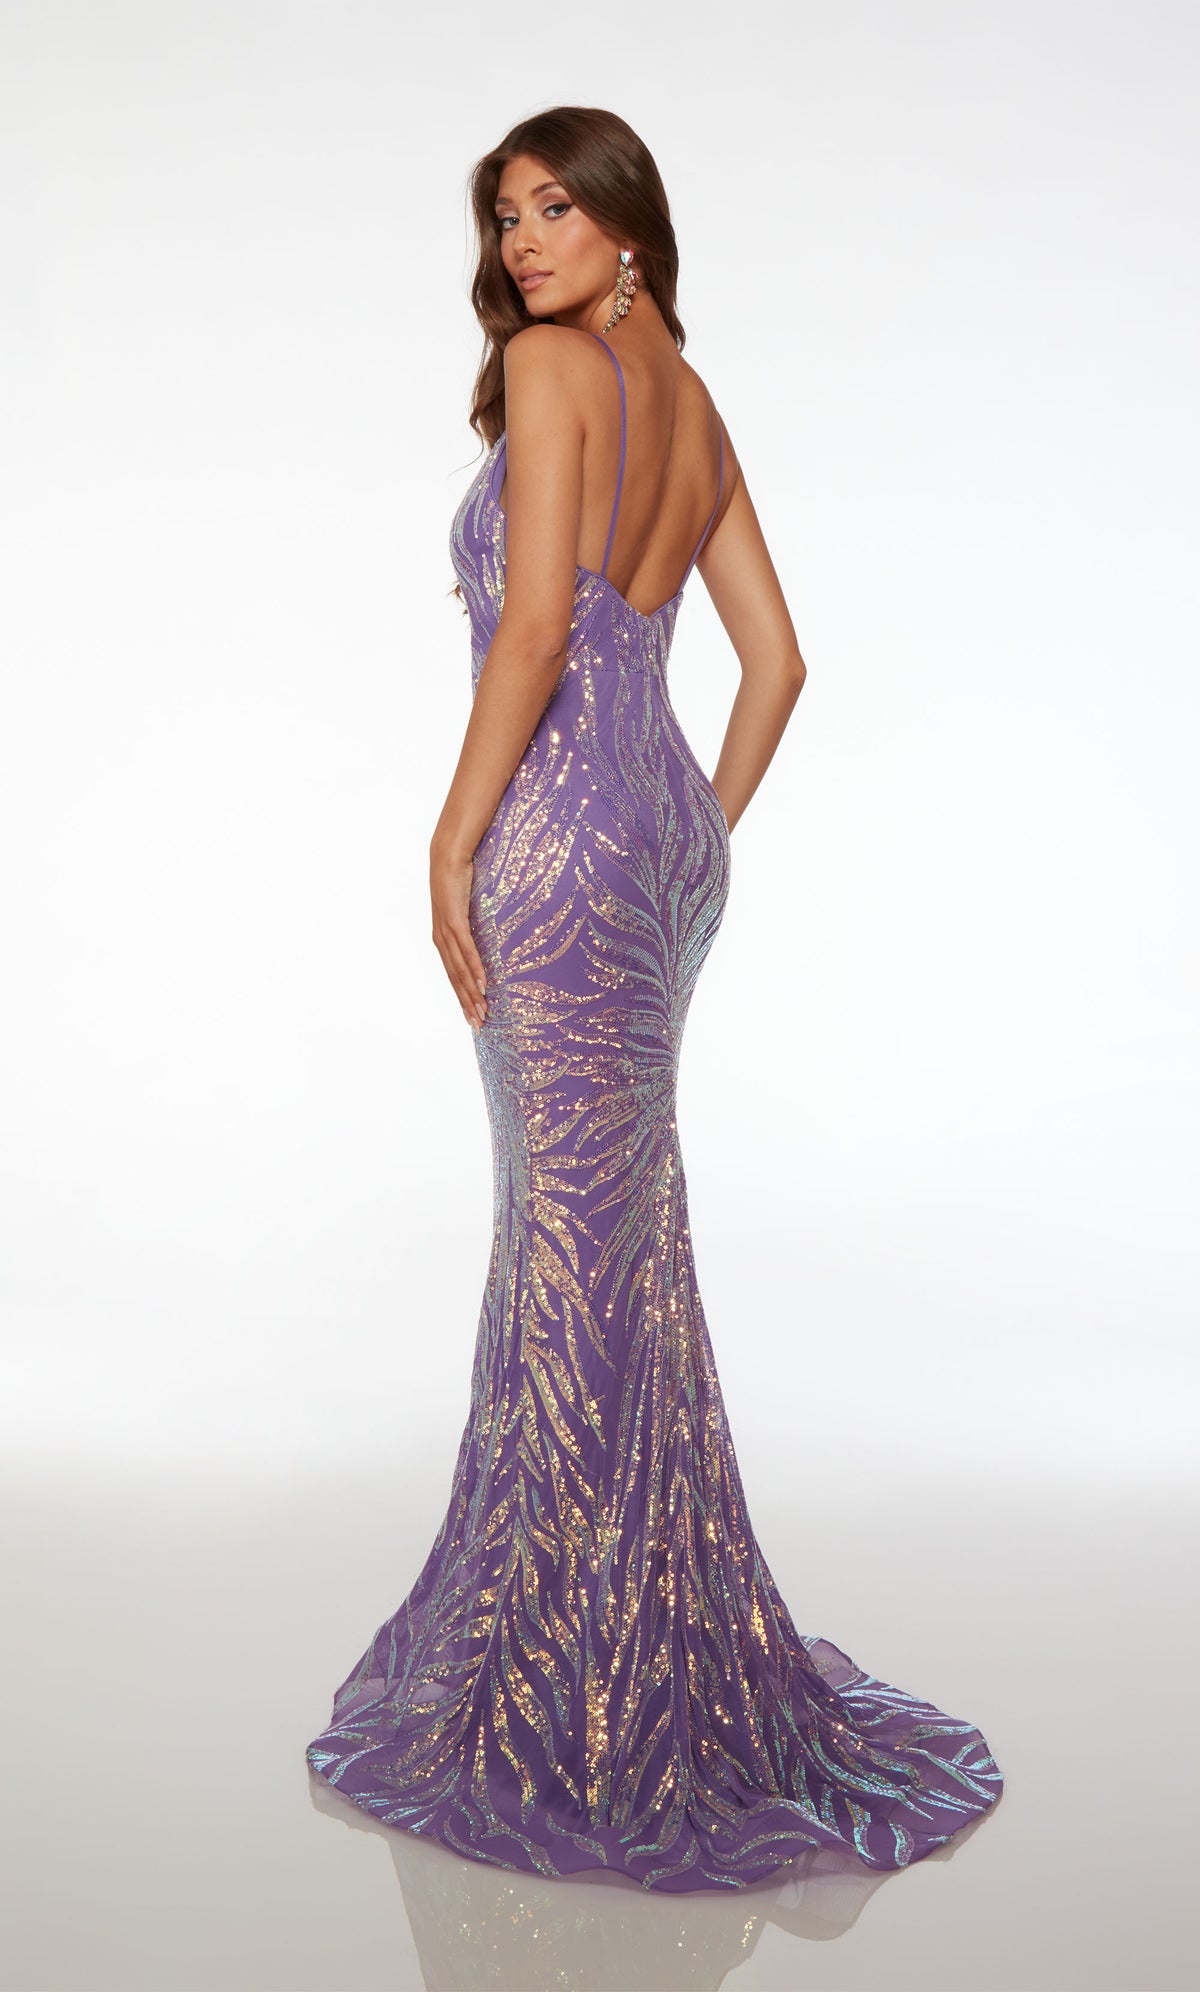 Purple fit-and-flare prom dress with plunging V neckline, spaghetti straps, zip-up back, slight train, and captivating sequin detailing throughout.